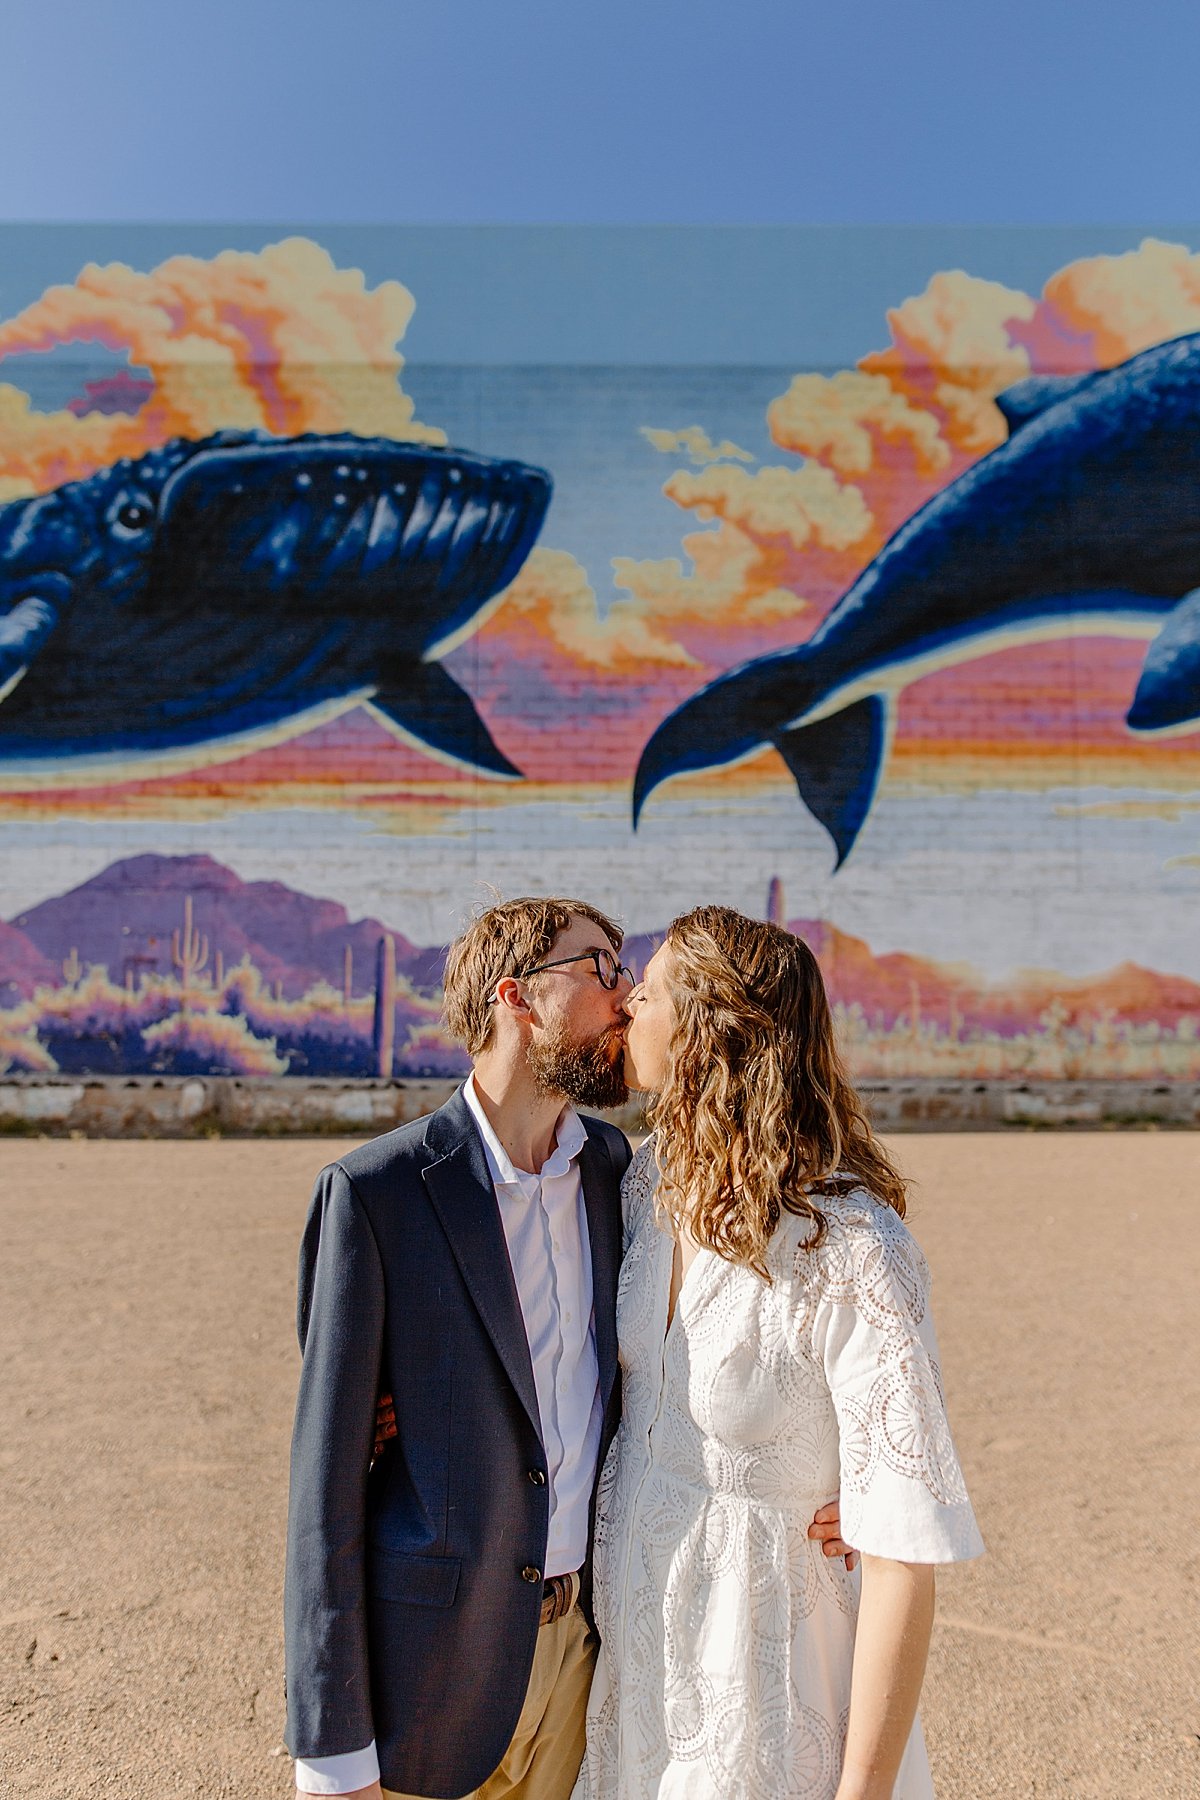  newly engaged couple kissing in front of Tucson whale mural while wearing dress clothes by Lucy Bouman Photography  